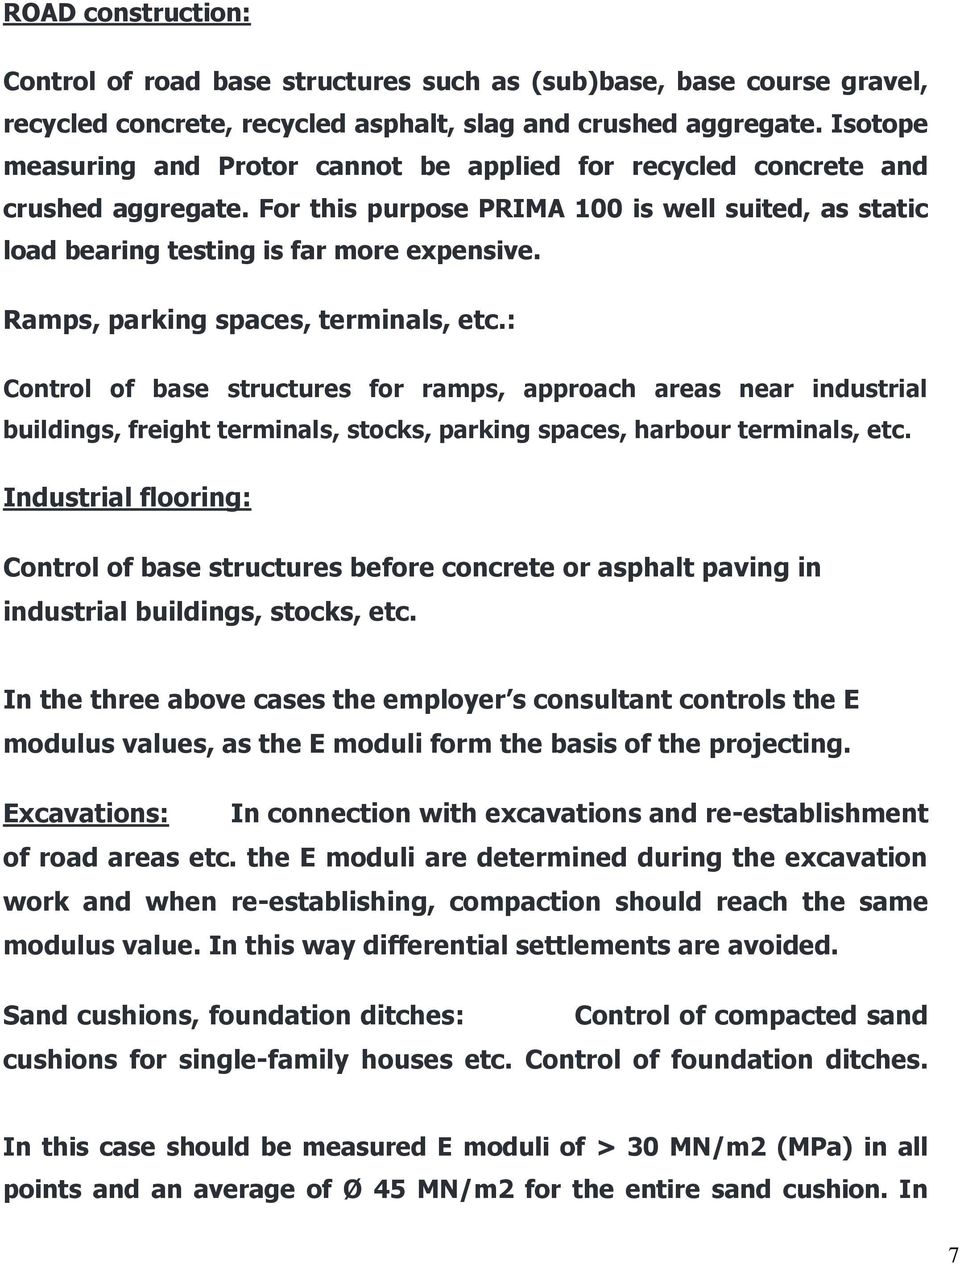 Ramps, parking spaces, terminals, etc.: Control of base structures for ramps, approach areas near industrial buildings, freight terminals, stocks, parking spaces, harbour terminals, etc.